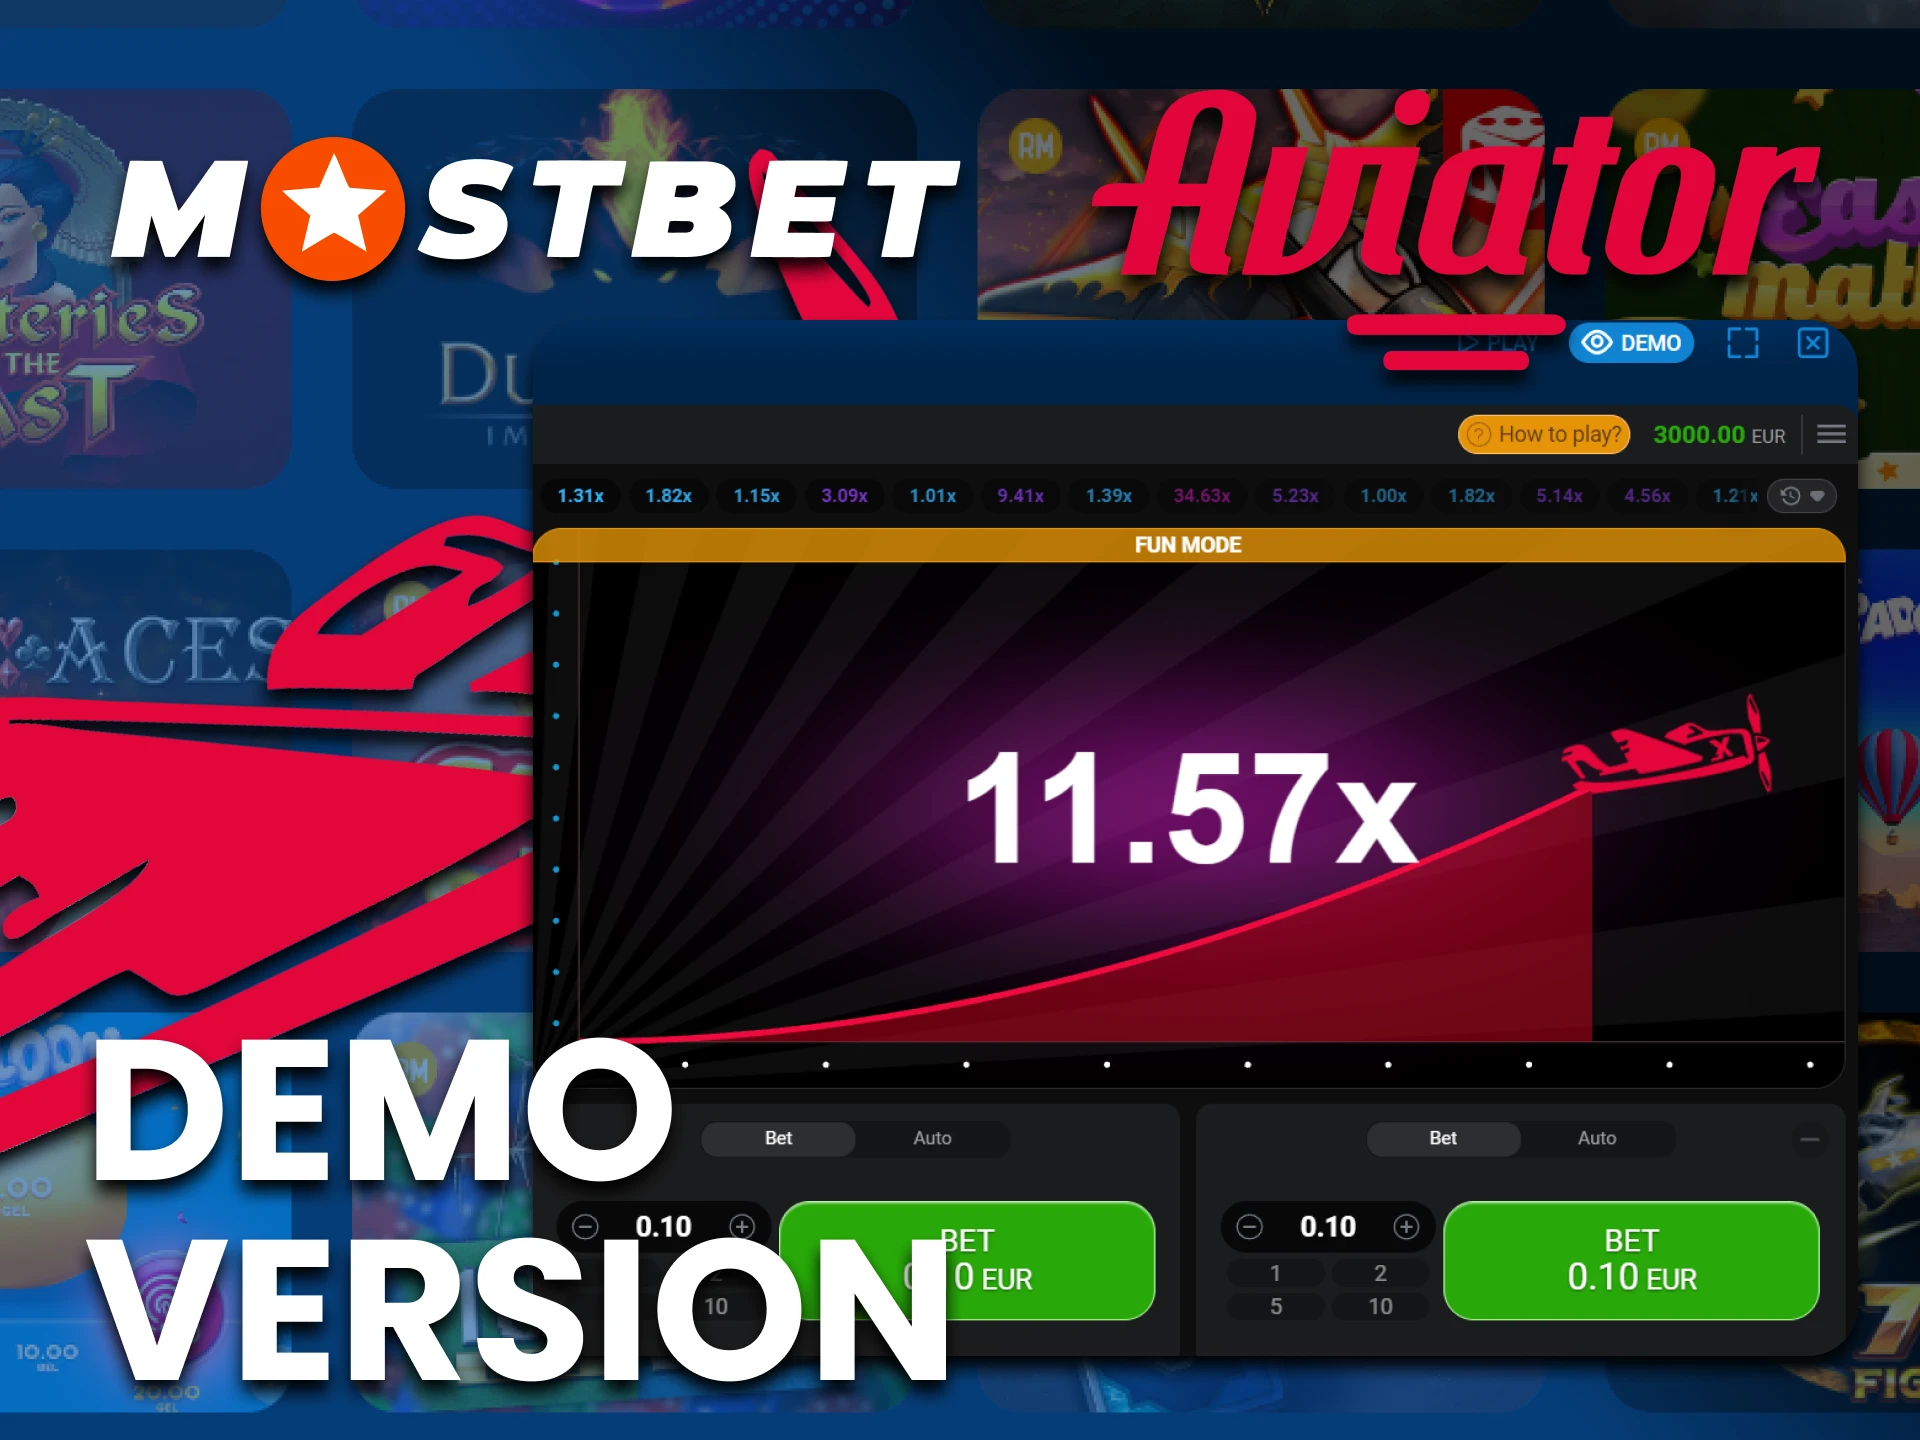 You can test the Aviator game in the demo version on the Mostbet site.